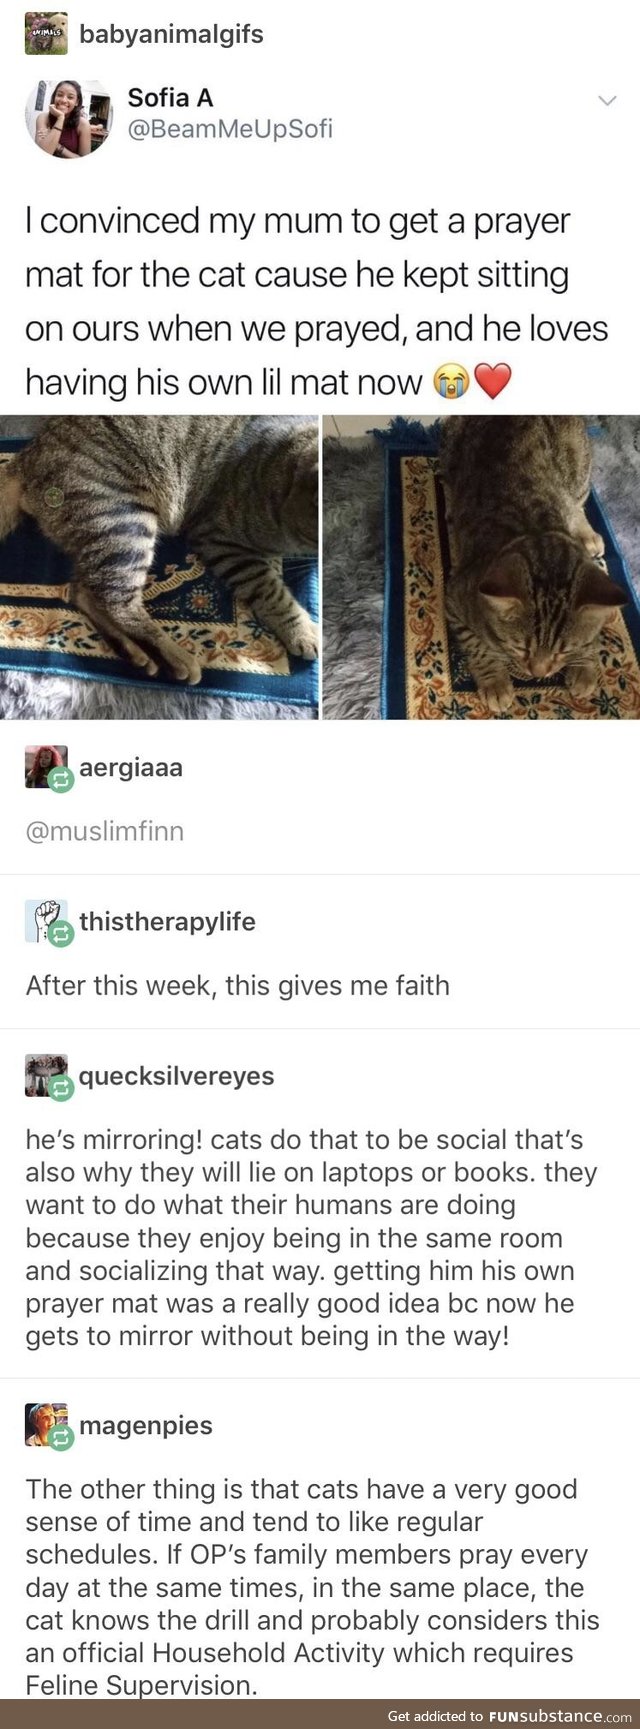 So I guess their cat converted to Islam